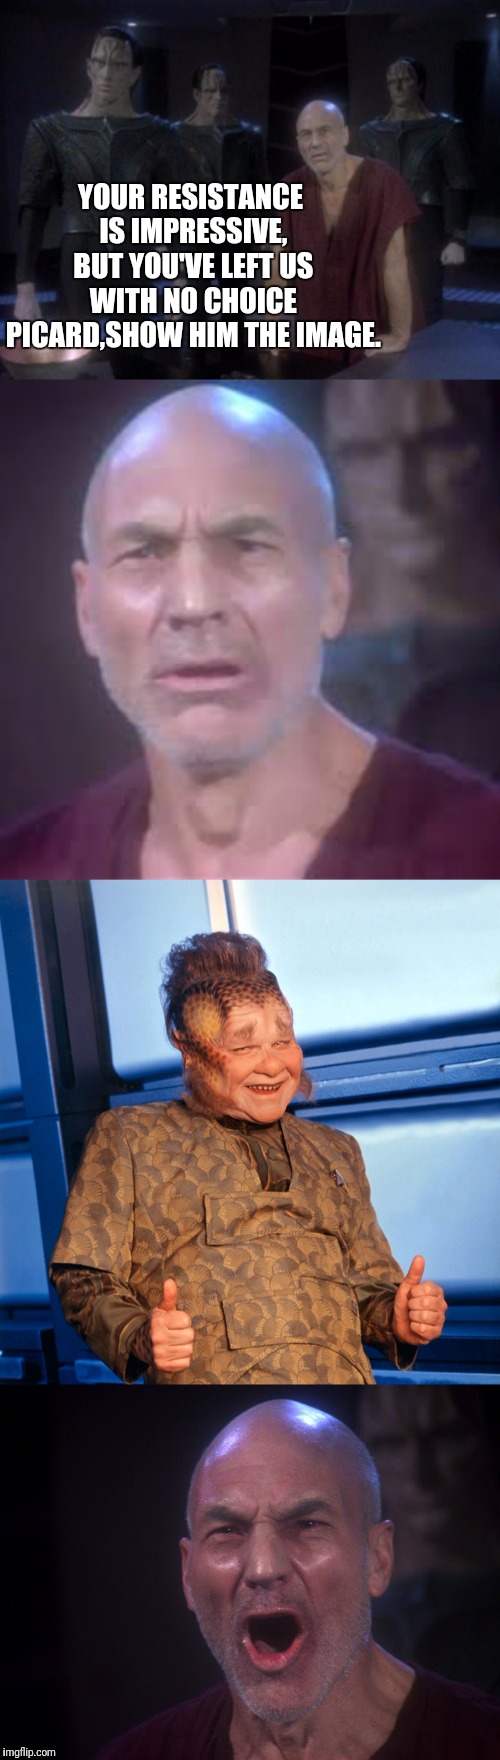 Will Picard Survive Imgflip